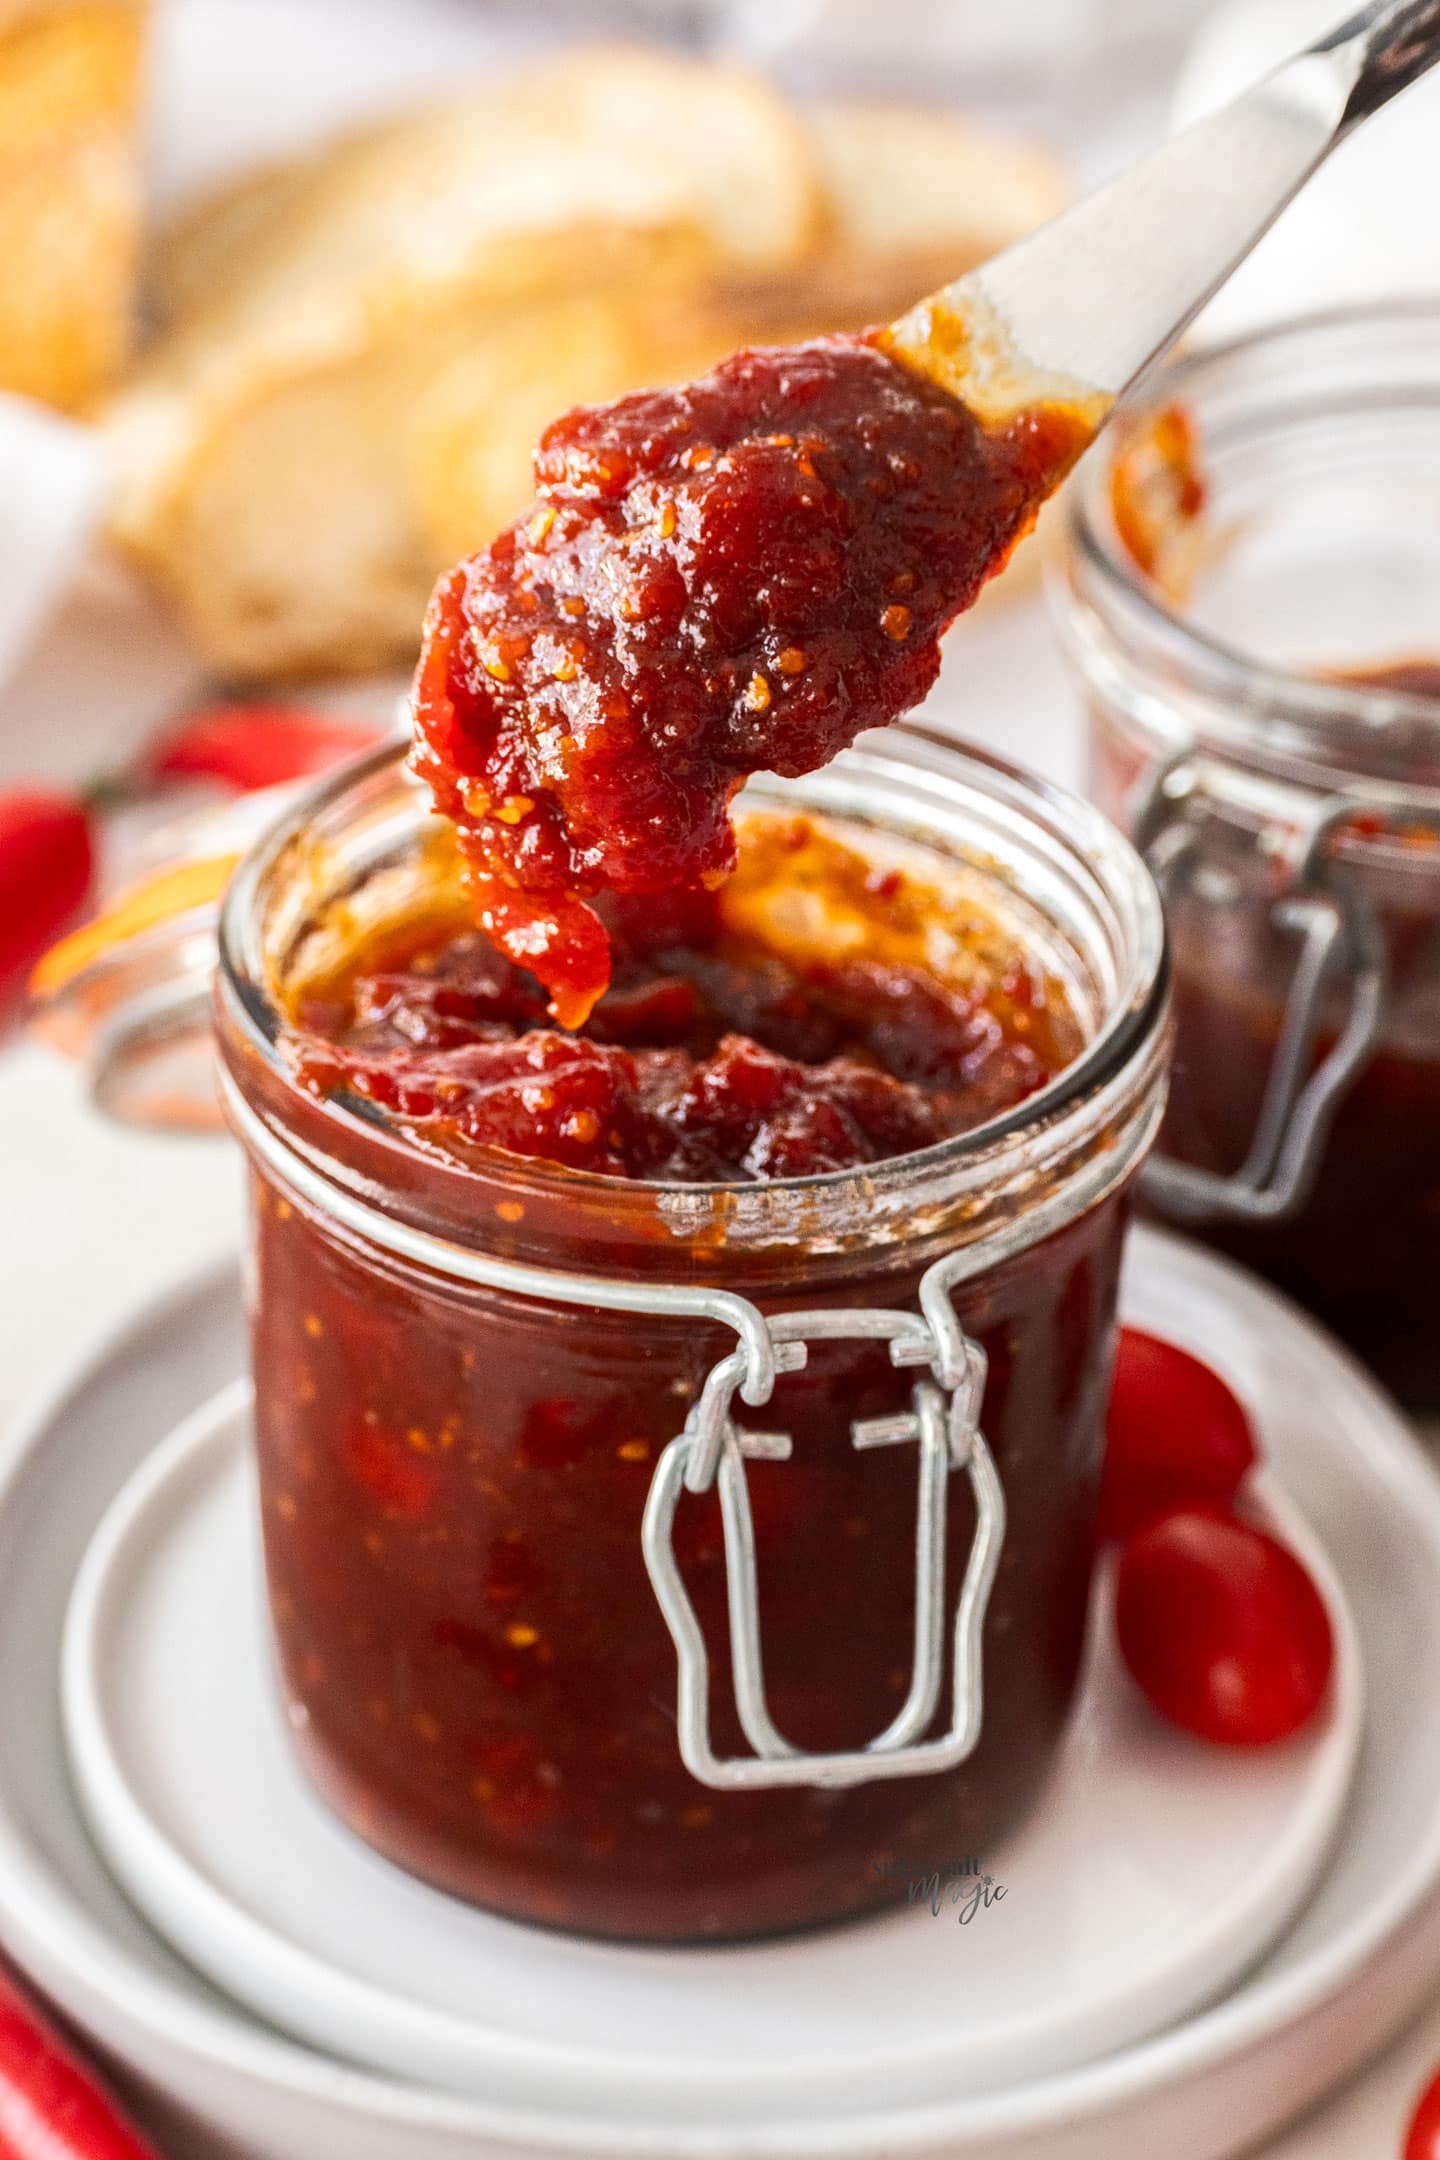 A knife scooping jam from a jar.